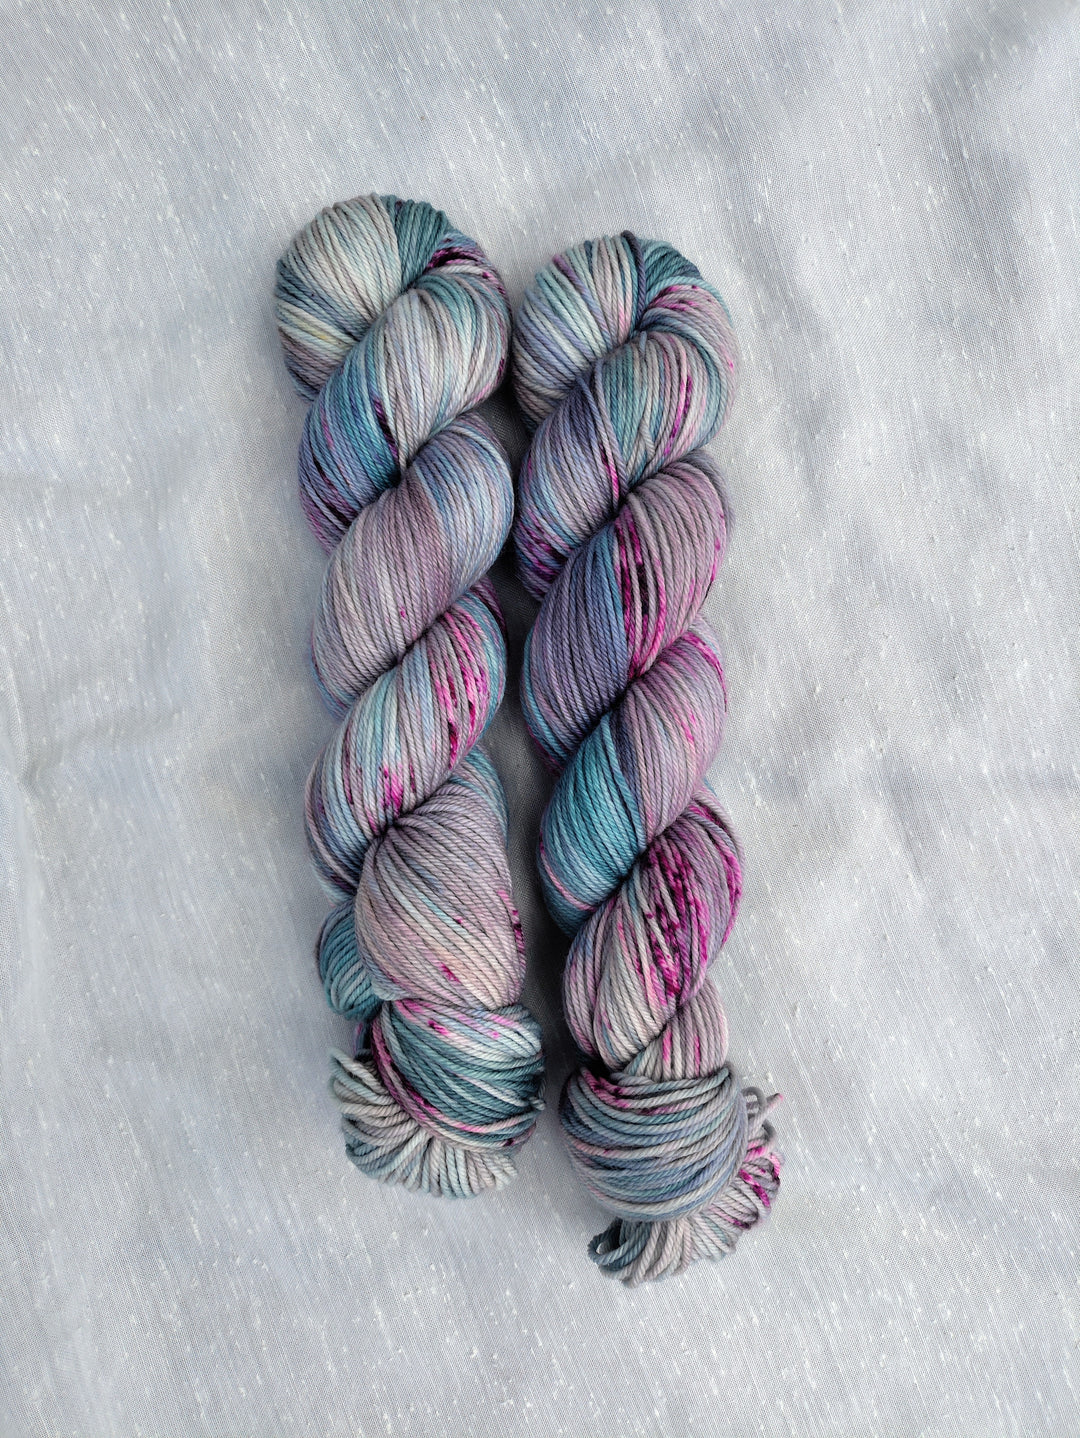 Blue, purple and green speckled yarn.